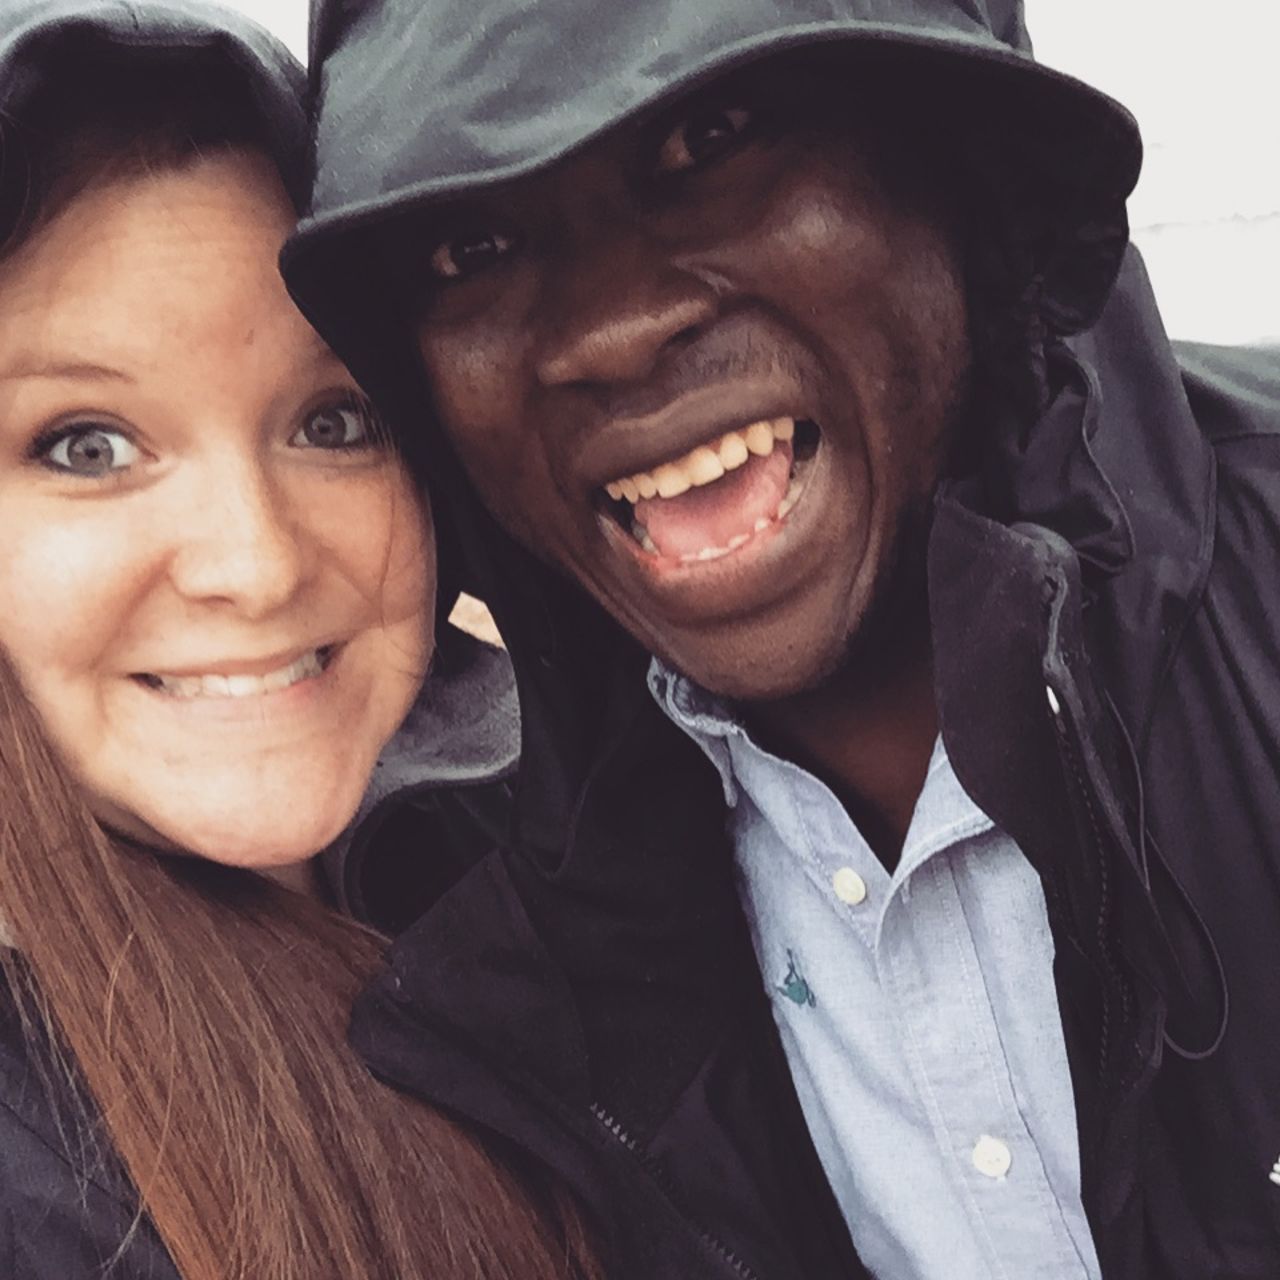 Kristin and Eric Njimegni take a selfie in the rain. The couple met in Moscow while studying and working abroad.